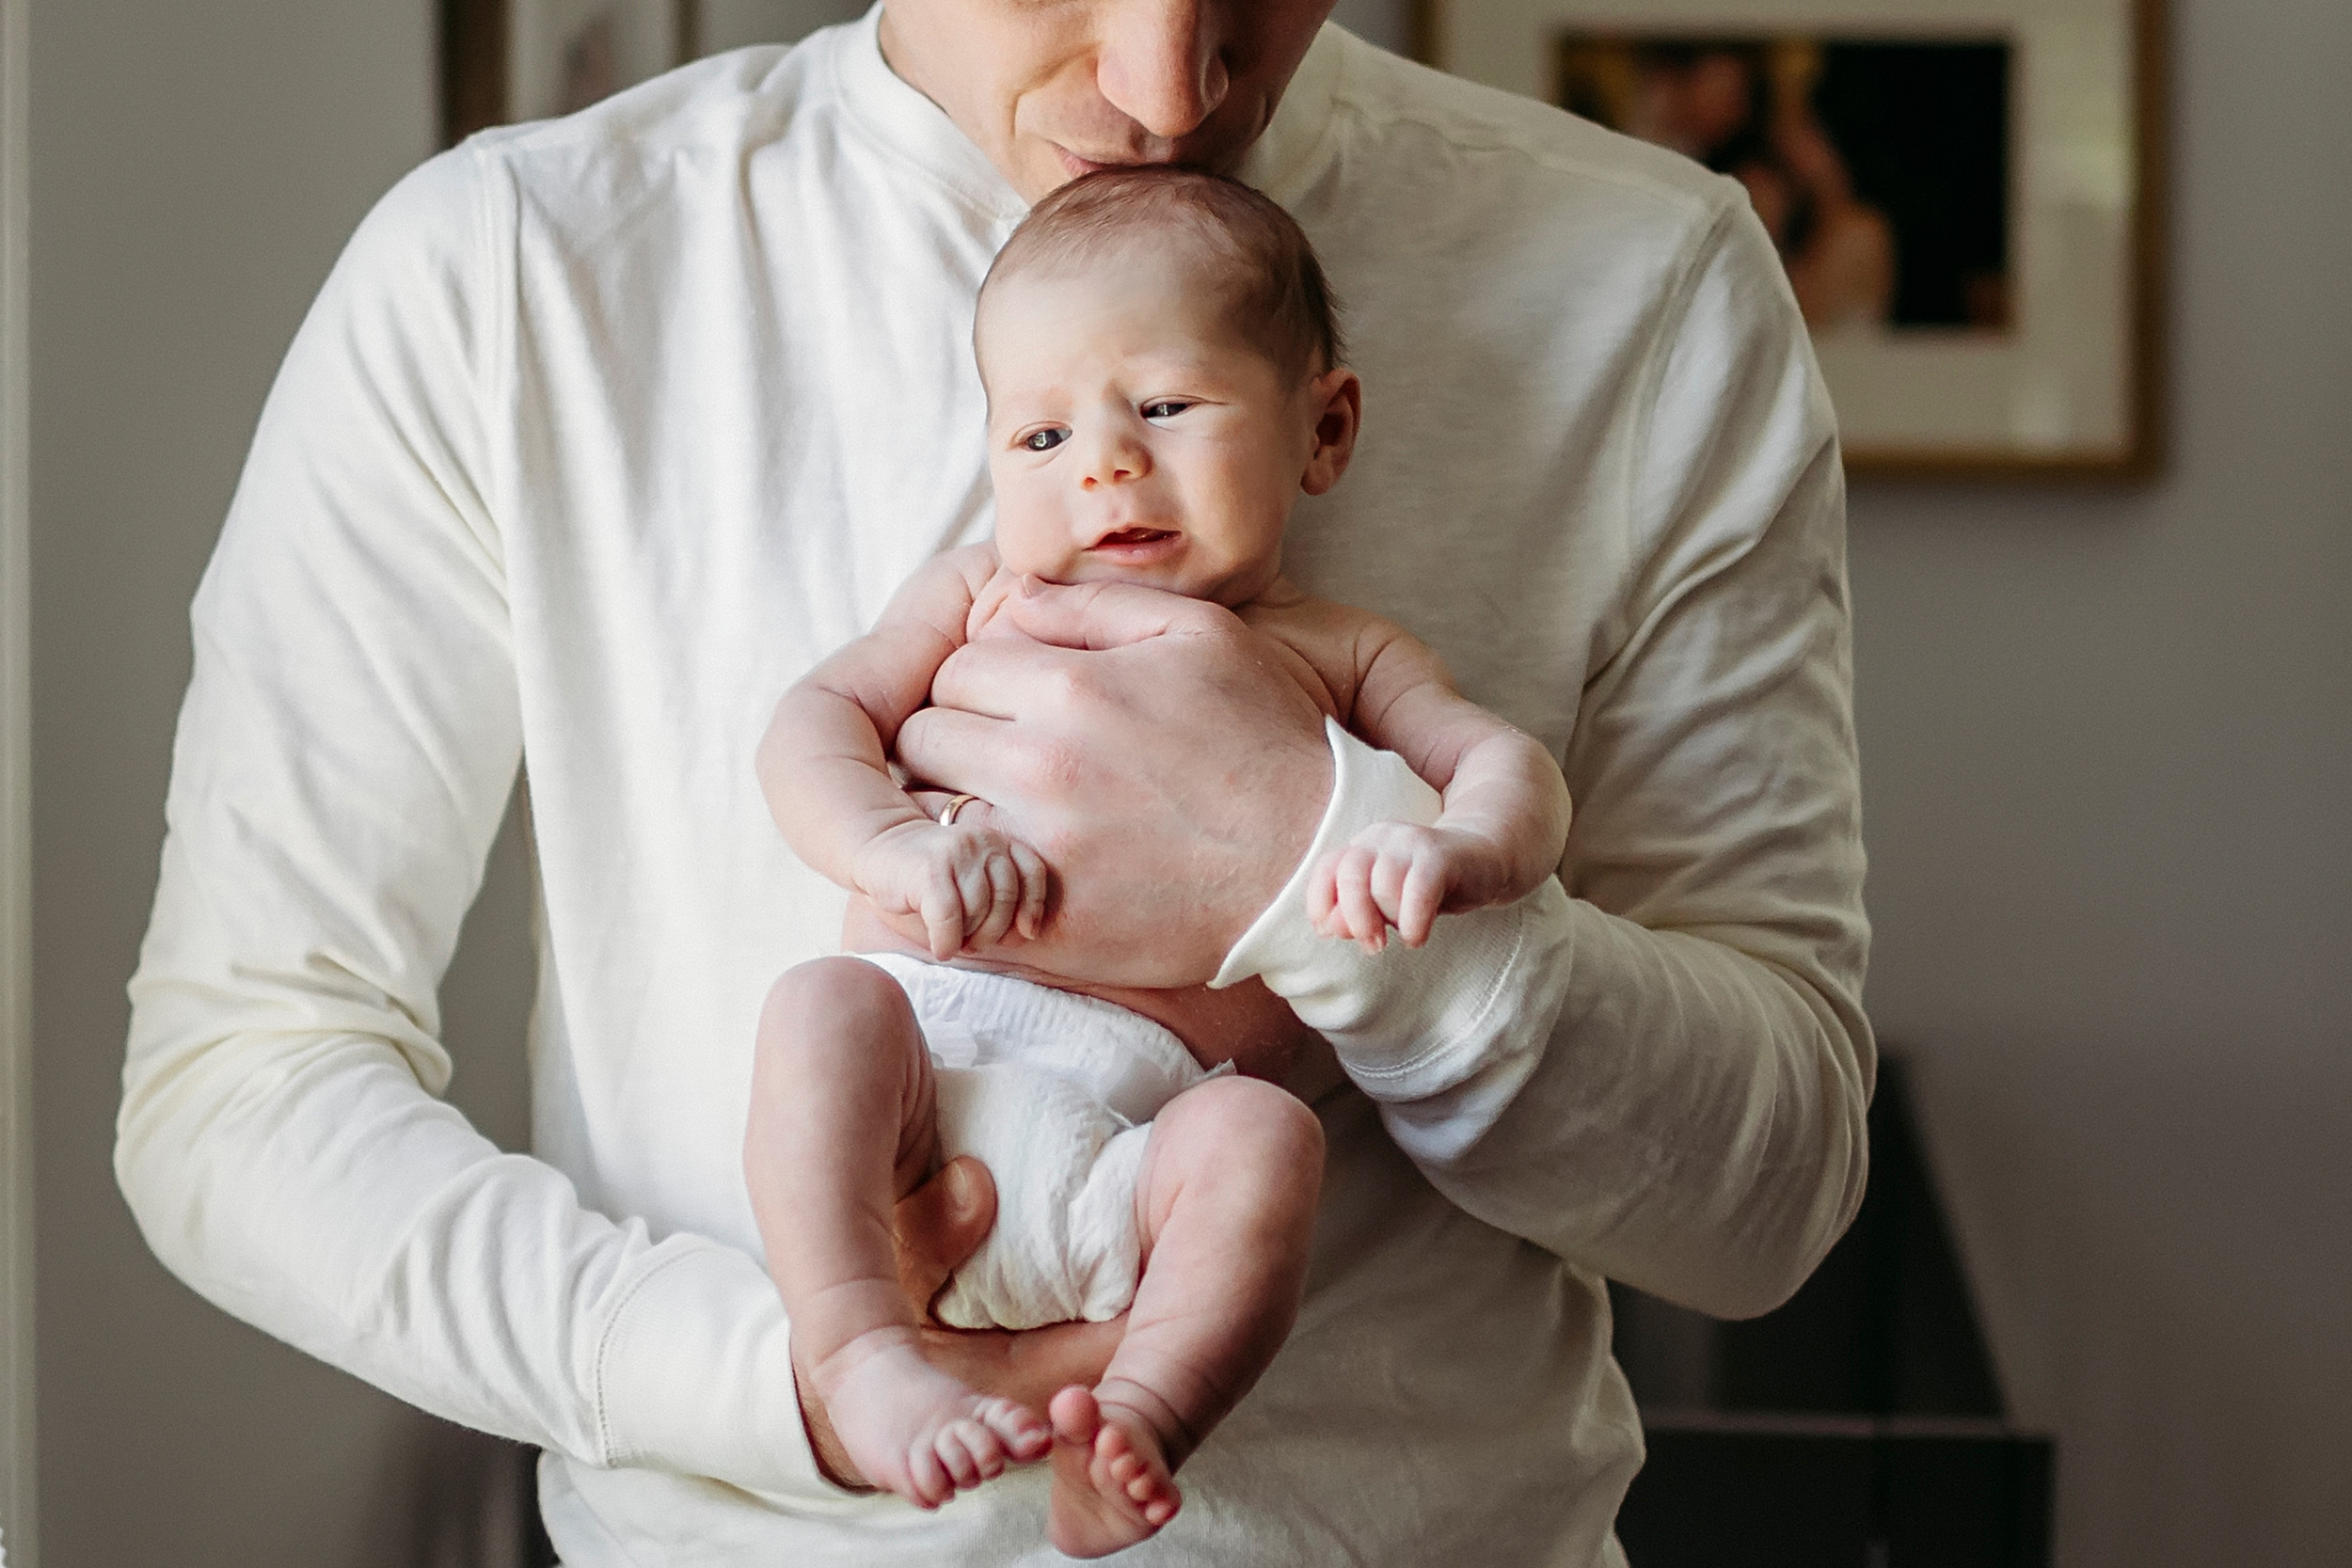 man in cream colored shirt holding a baby, Blog post for CT Baby photographer called What should dad wear to a lifestyle newborn session